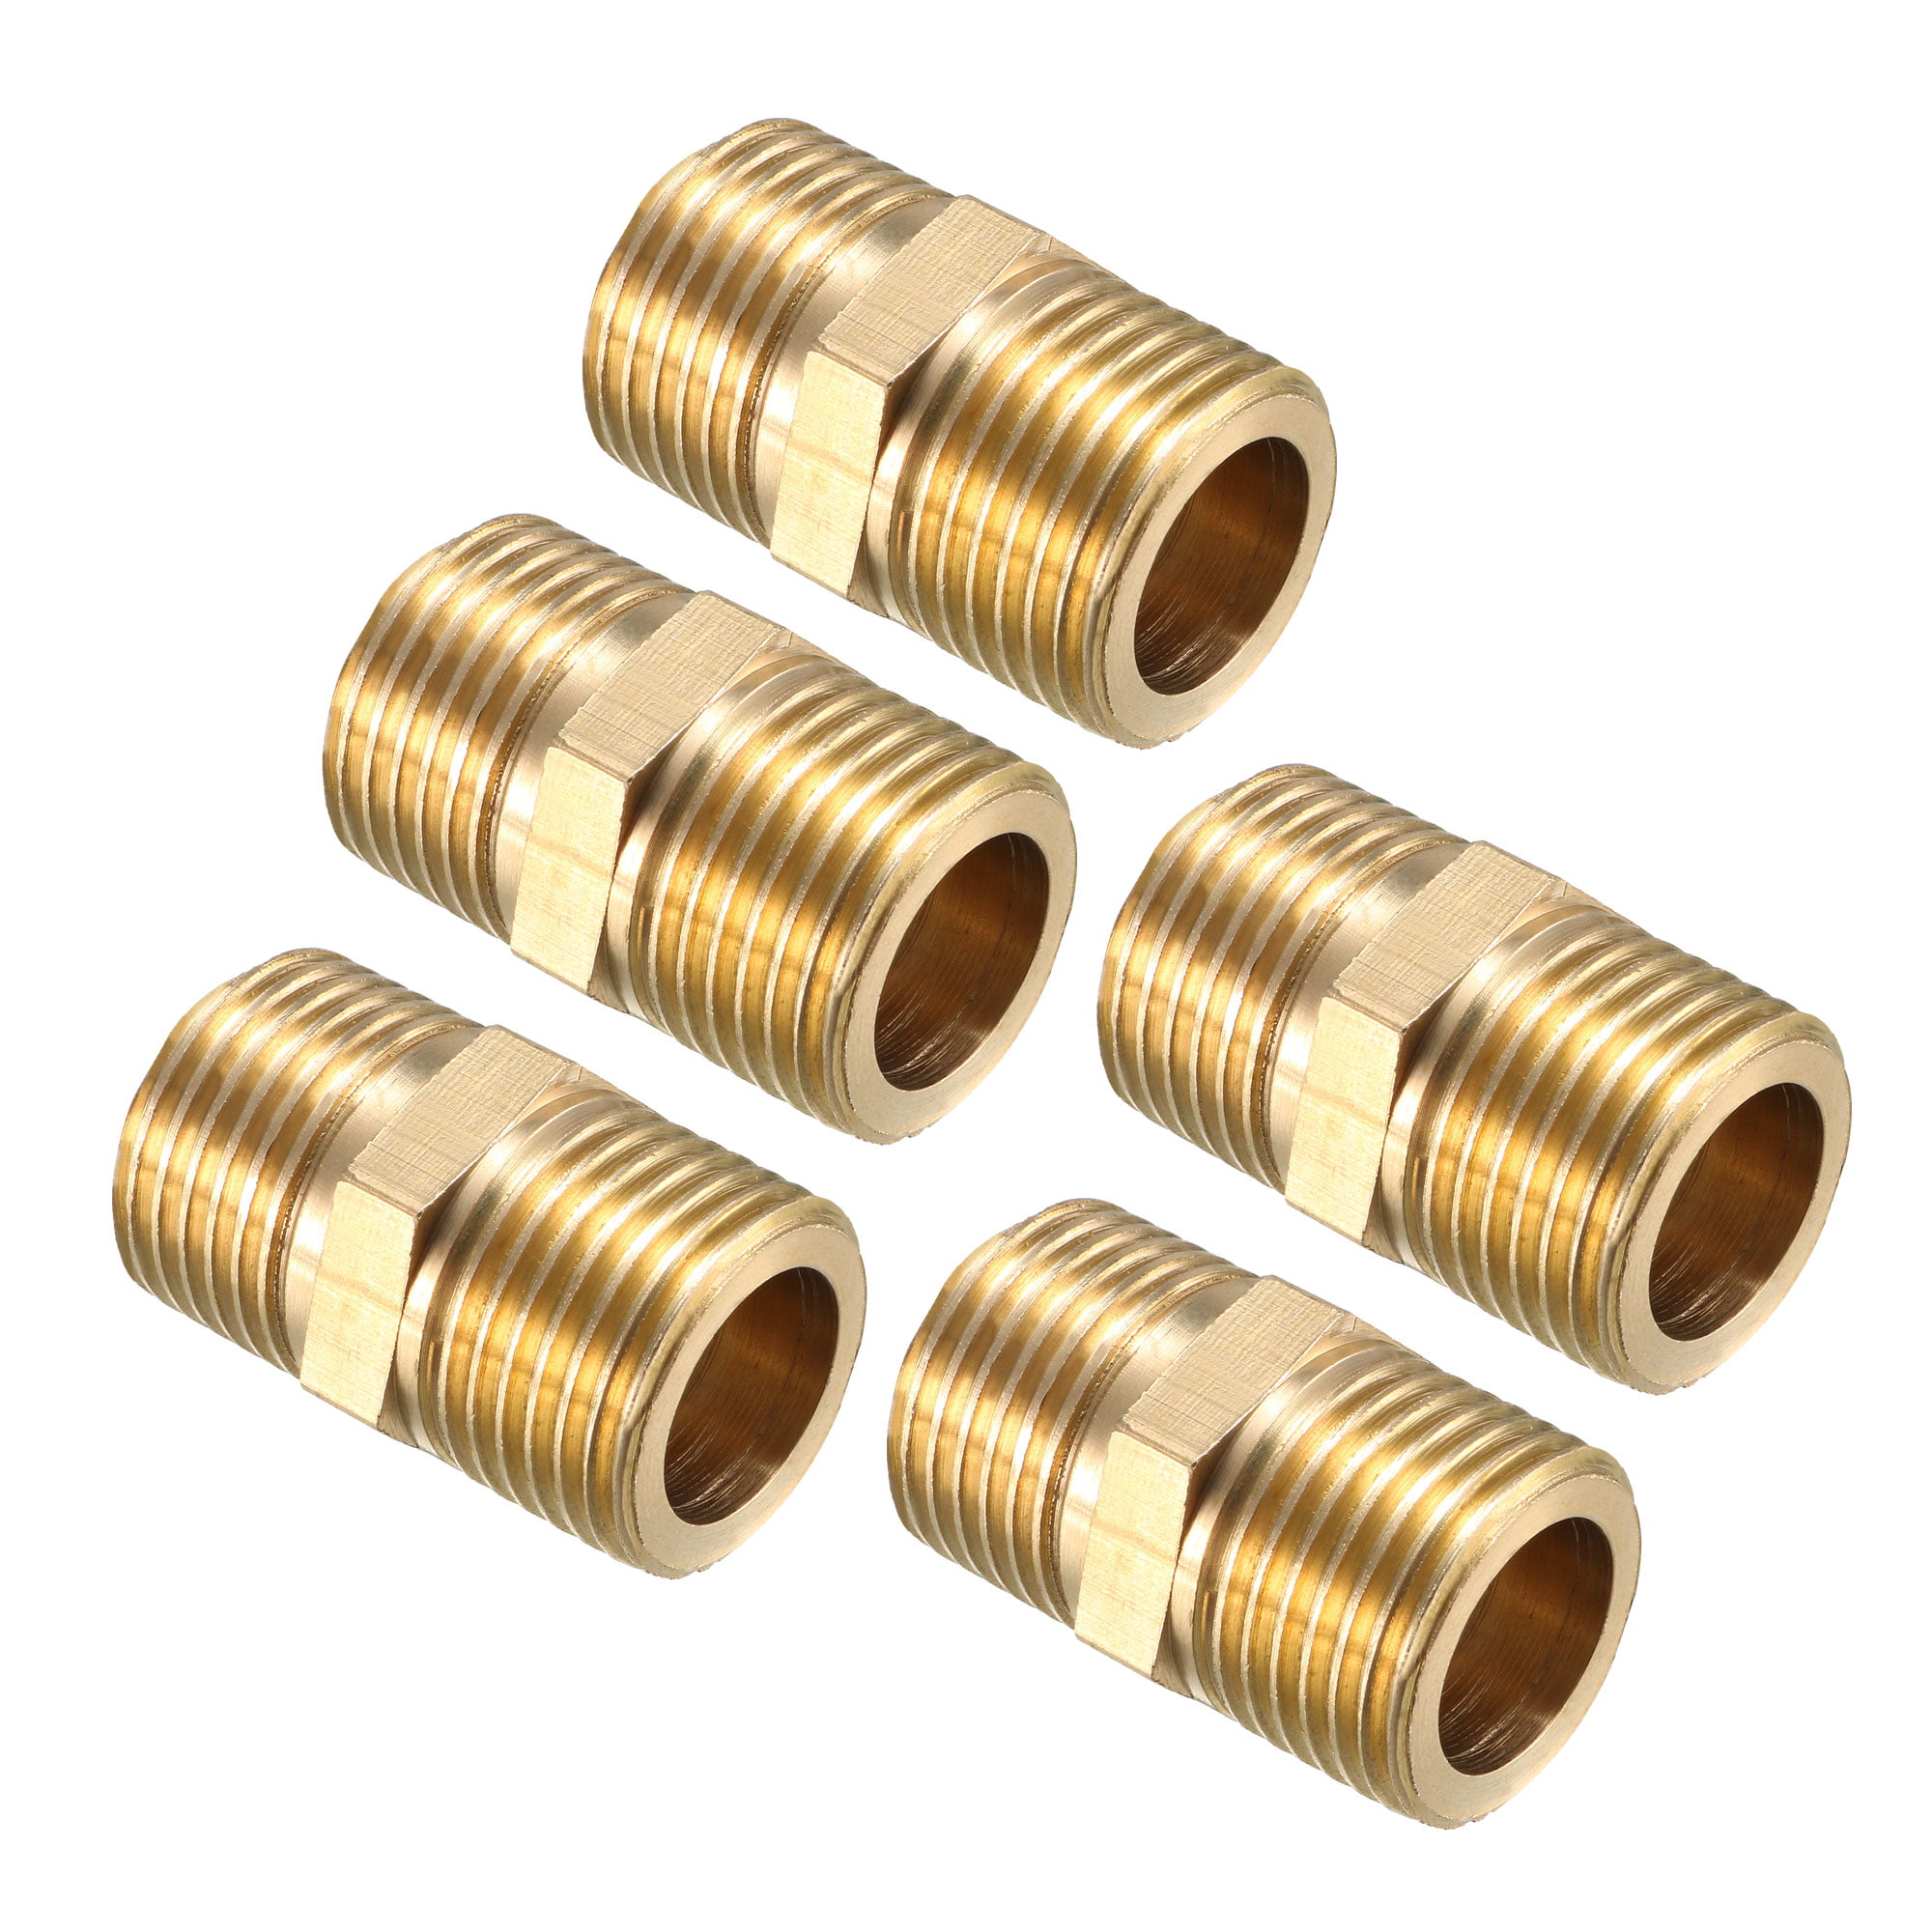 5pcs 4 ways 1/2" BSP Cross Female Connection Pipe Brass Coupler Adapter 